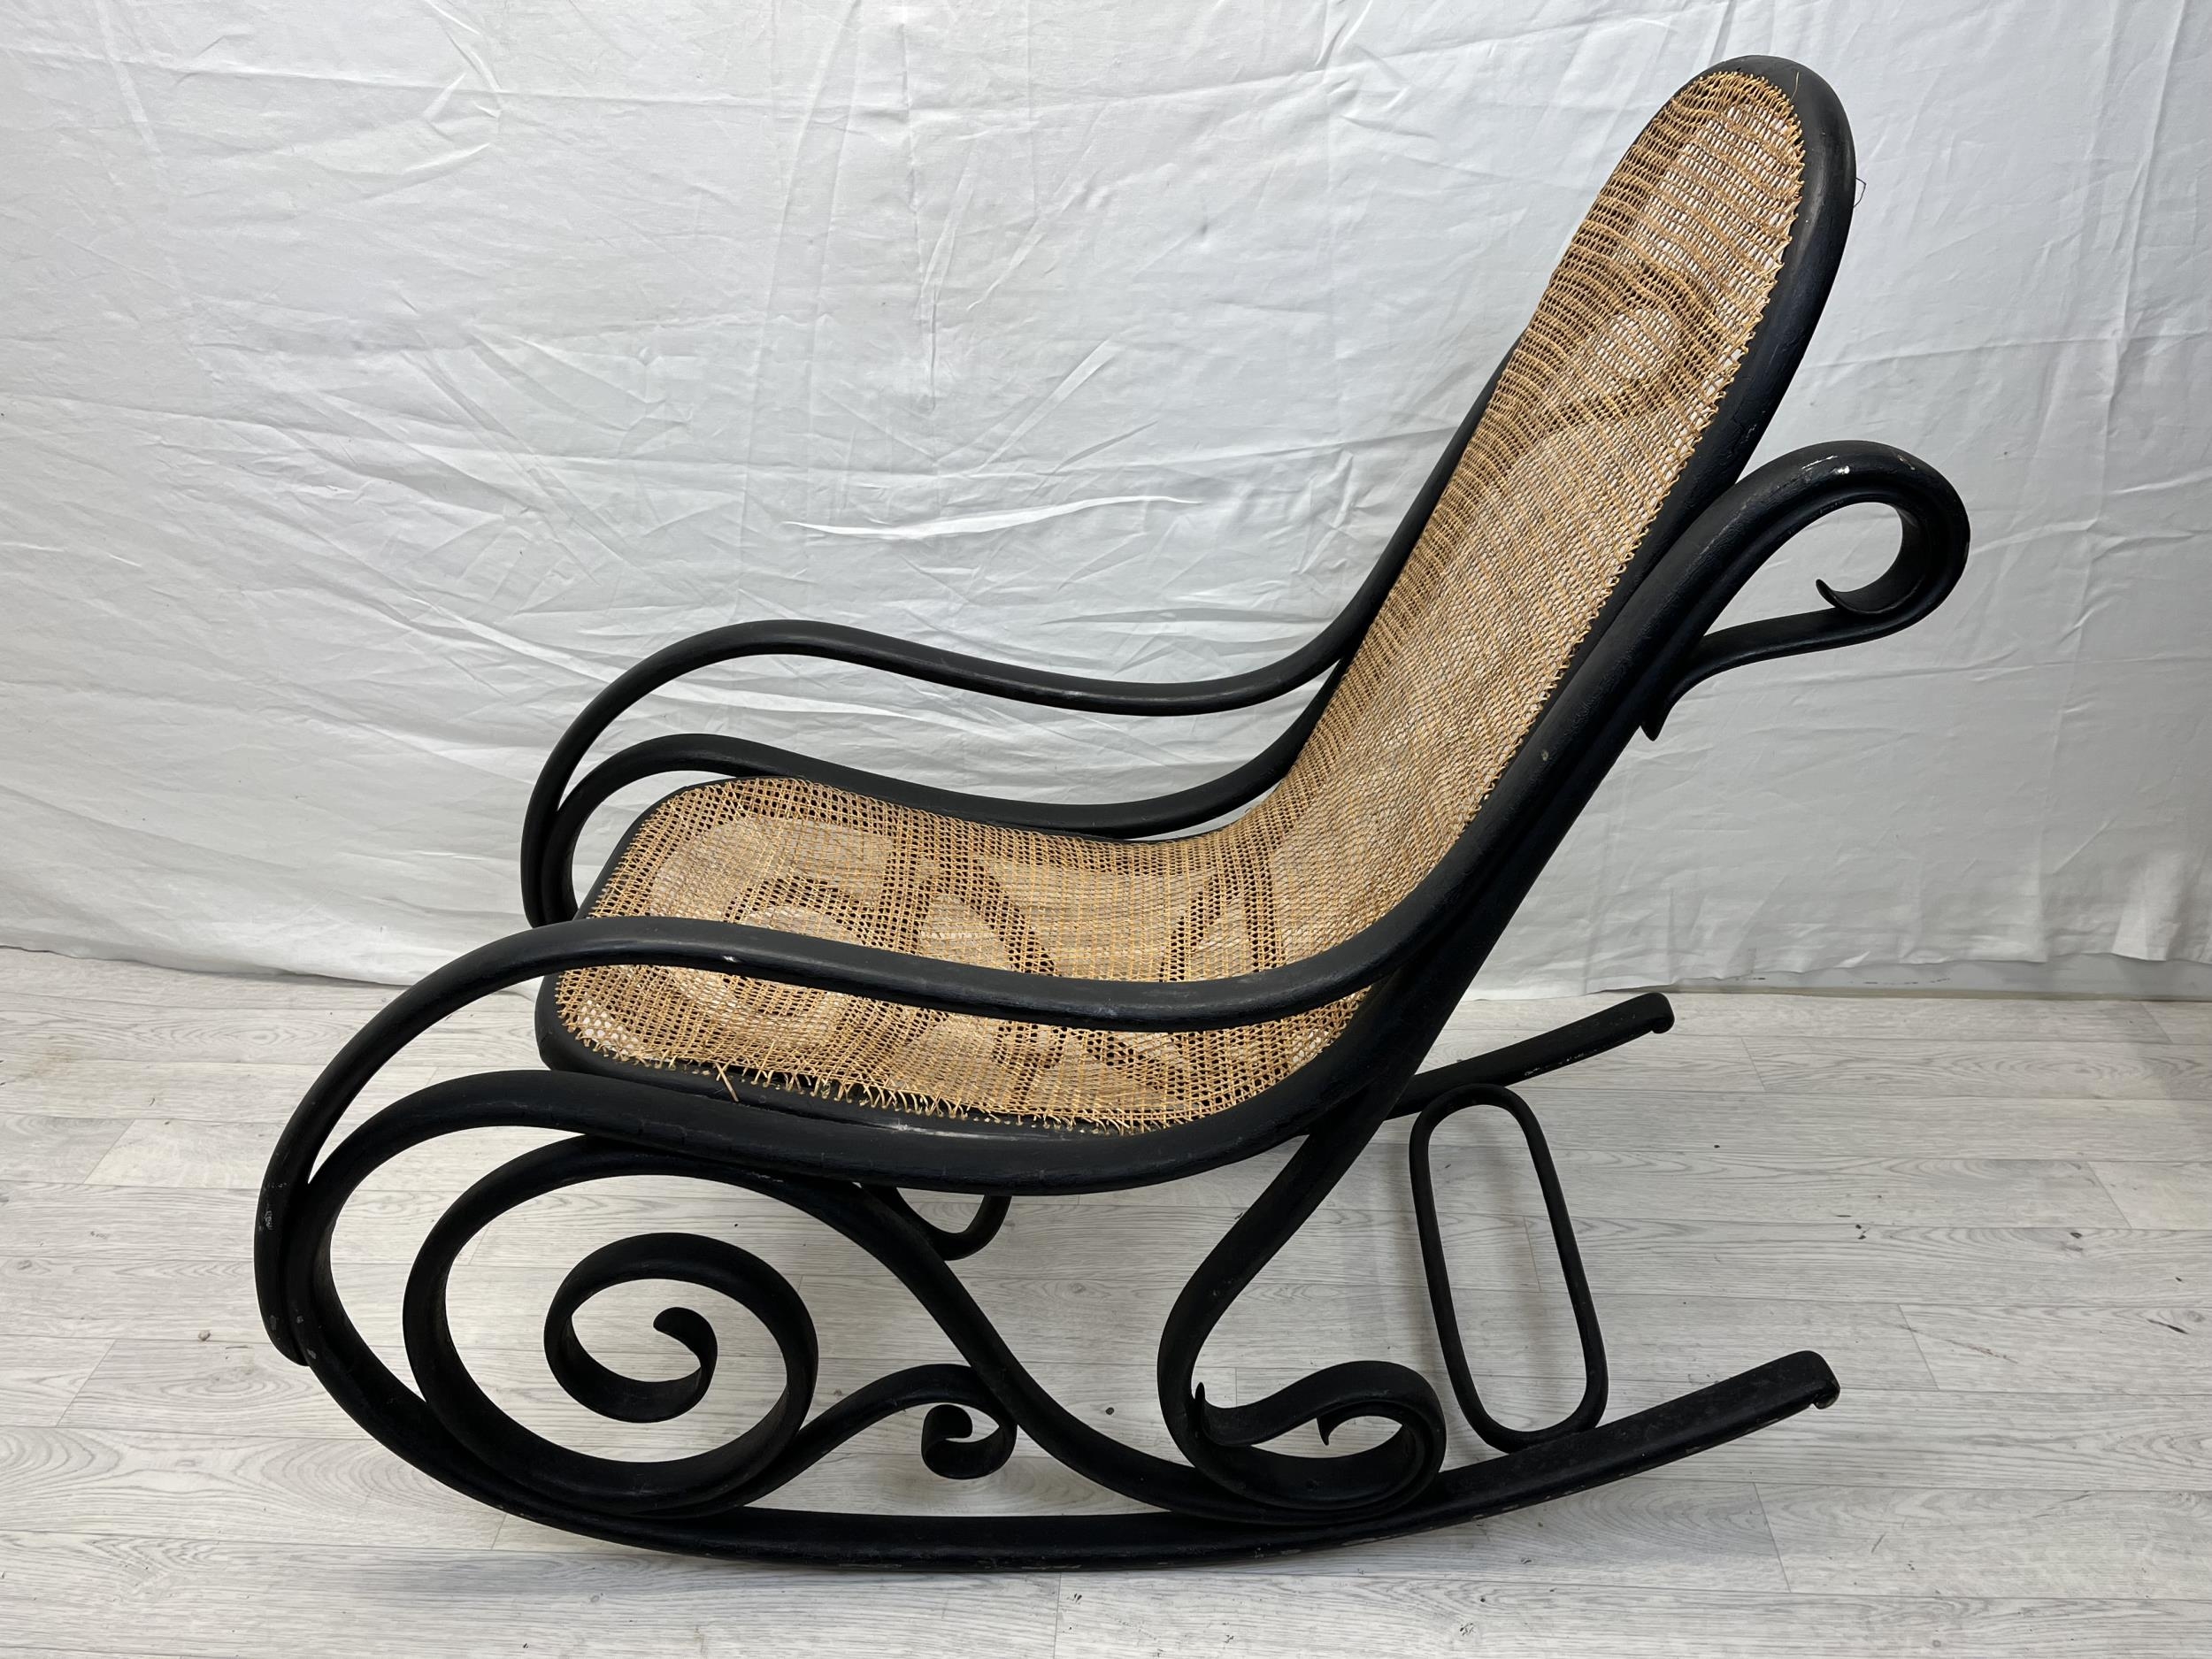 Rocking chair, 19th century Thonet style bentwood with caned seat. H.102cm. - Image 4 of 4